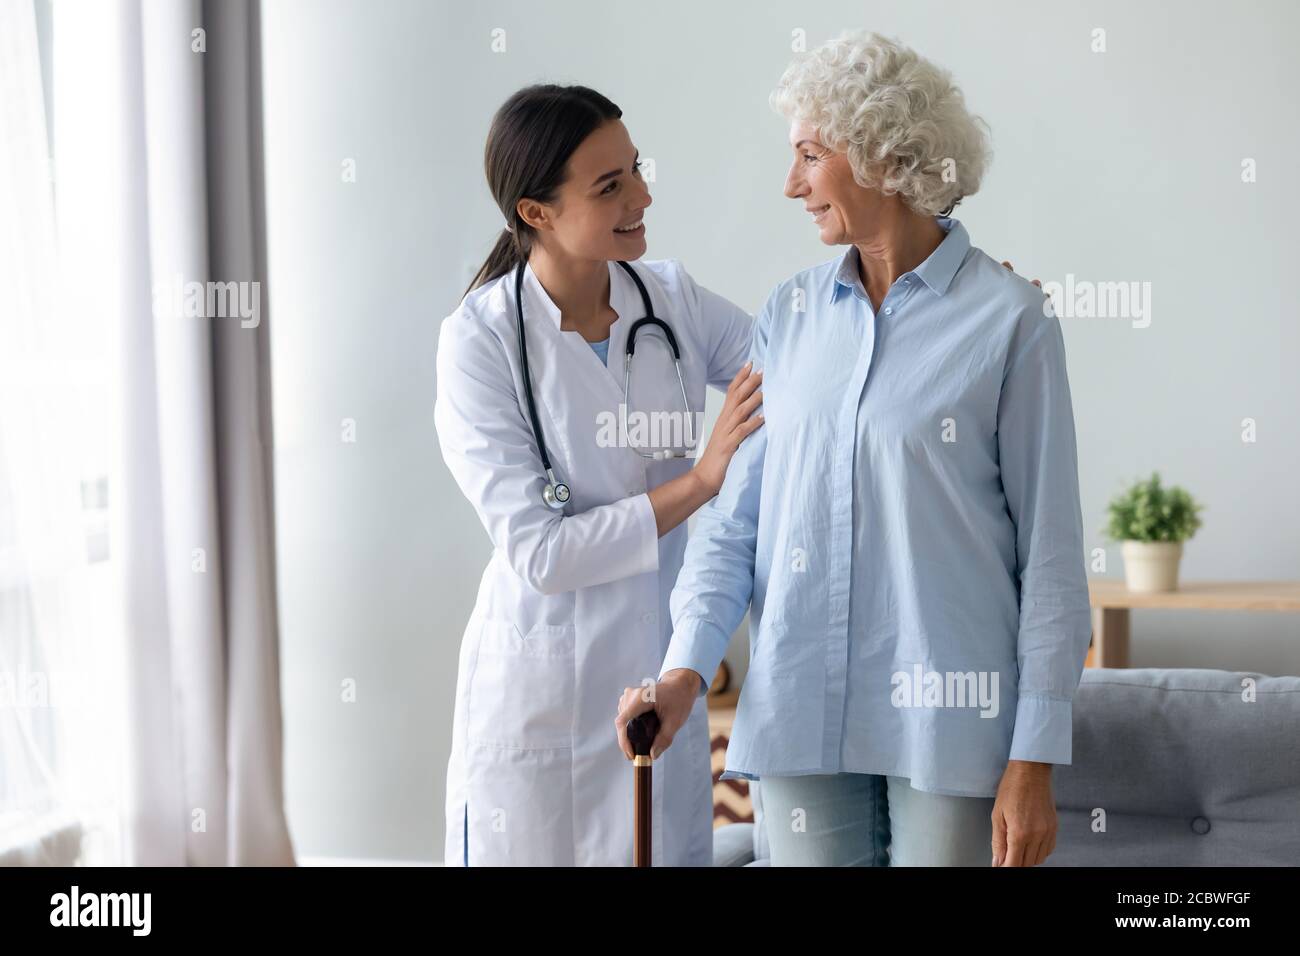 Smiling young physiotherapist starting rehabilitation procedure with elderly patient. Stock Photo